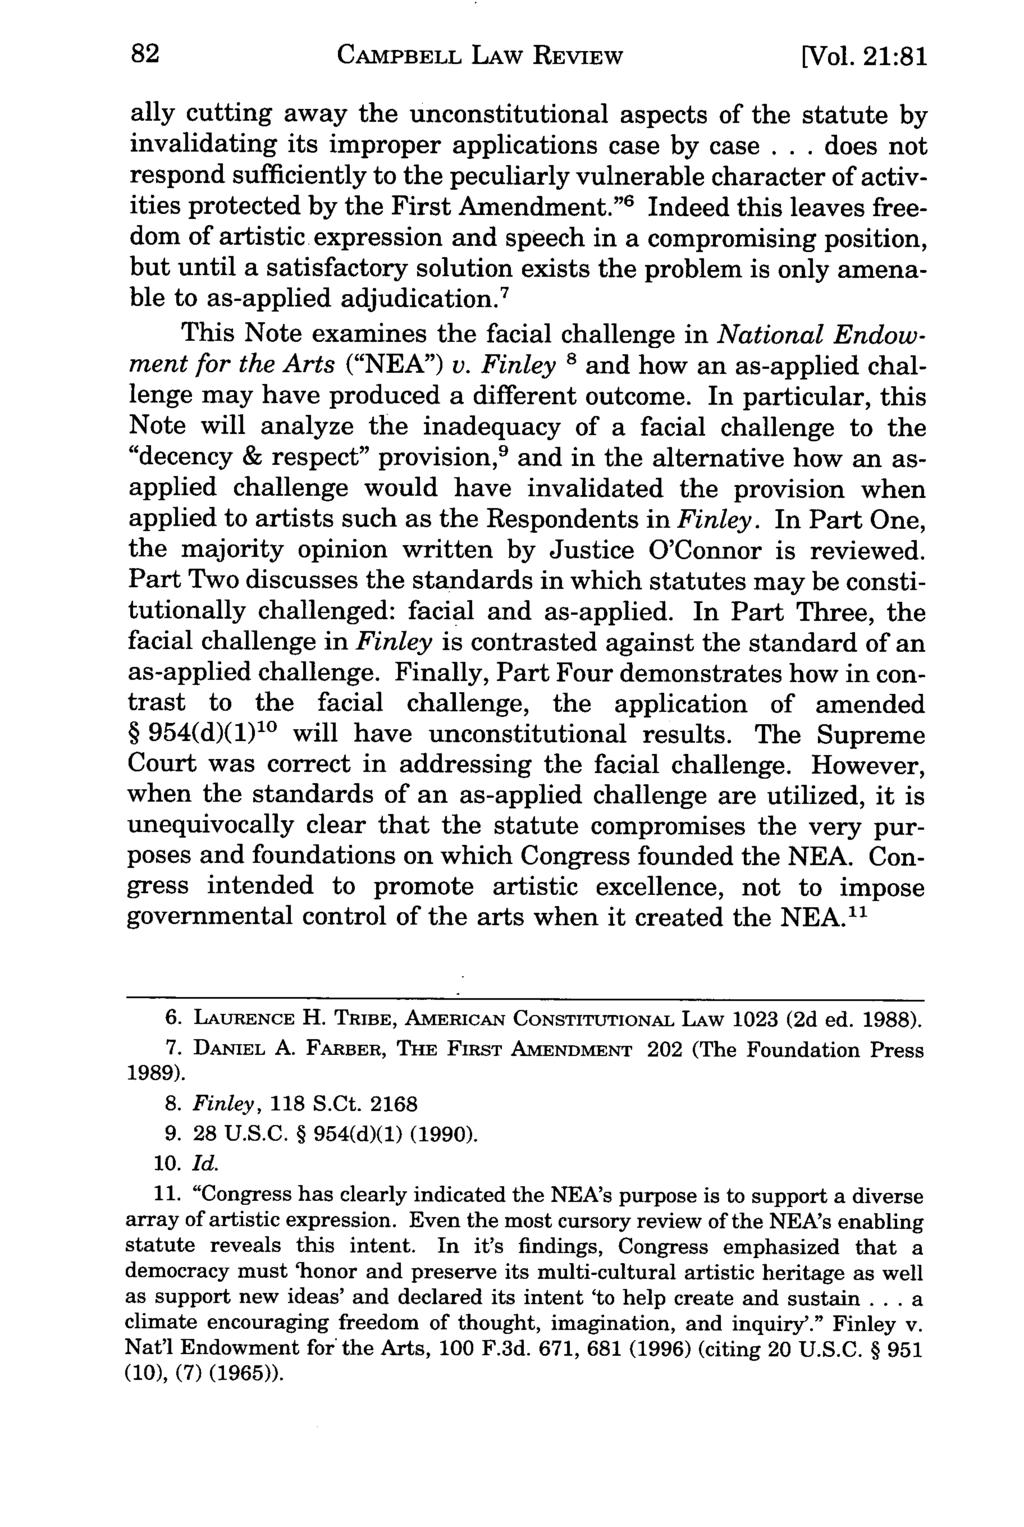 Campbell CAMPBELL Law Review, LAW Vol. 21, REVIEW Iss. 1 [1998], Art. 7 [Vol.